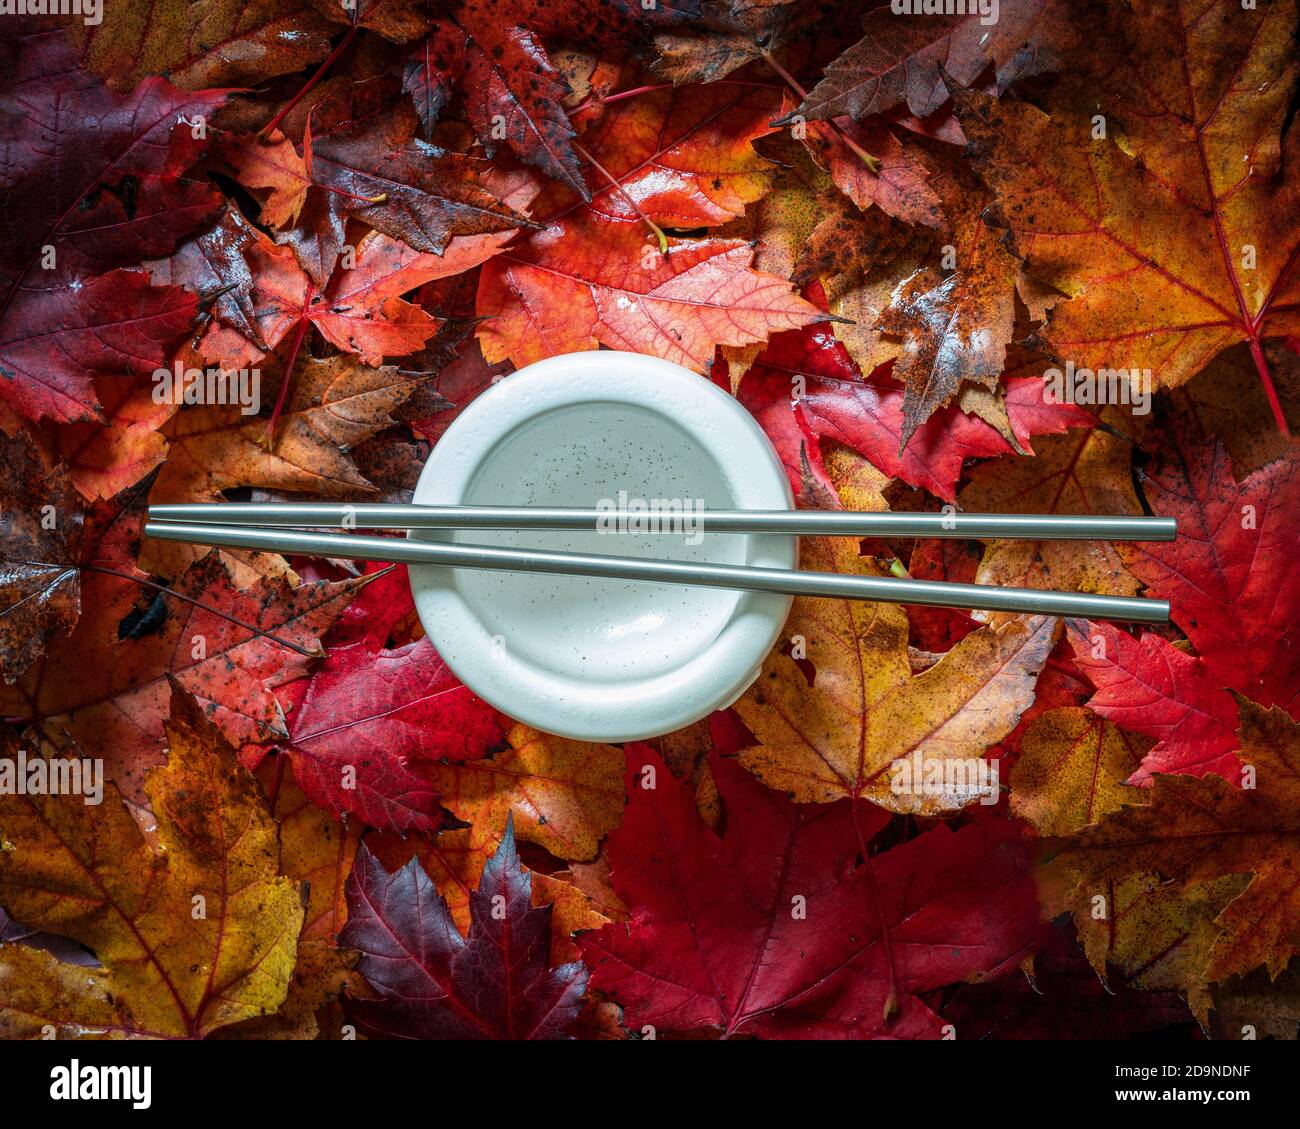 Acer maple leaves with autumn colour multi coloured with white chines bowl and chopsticks on a black background Stock Photo